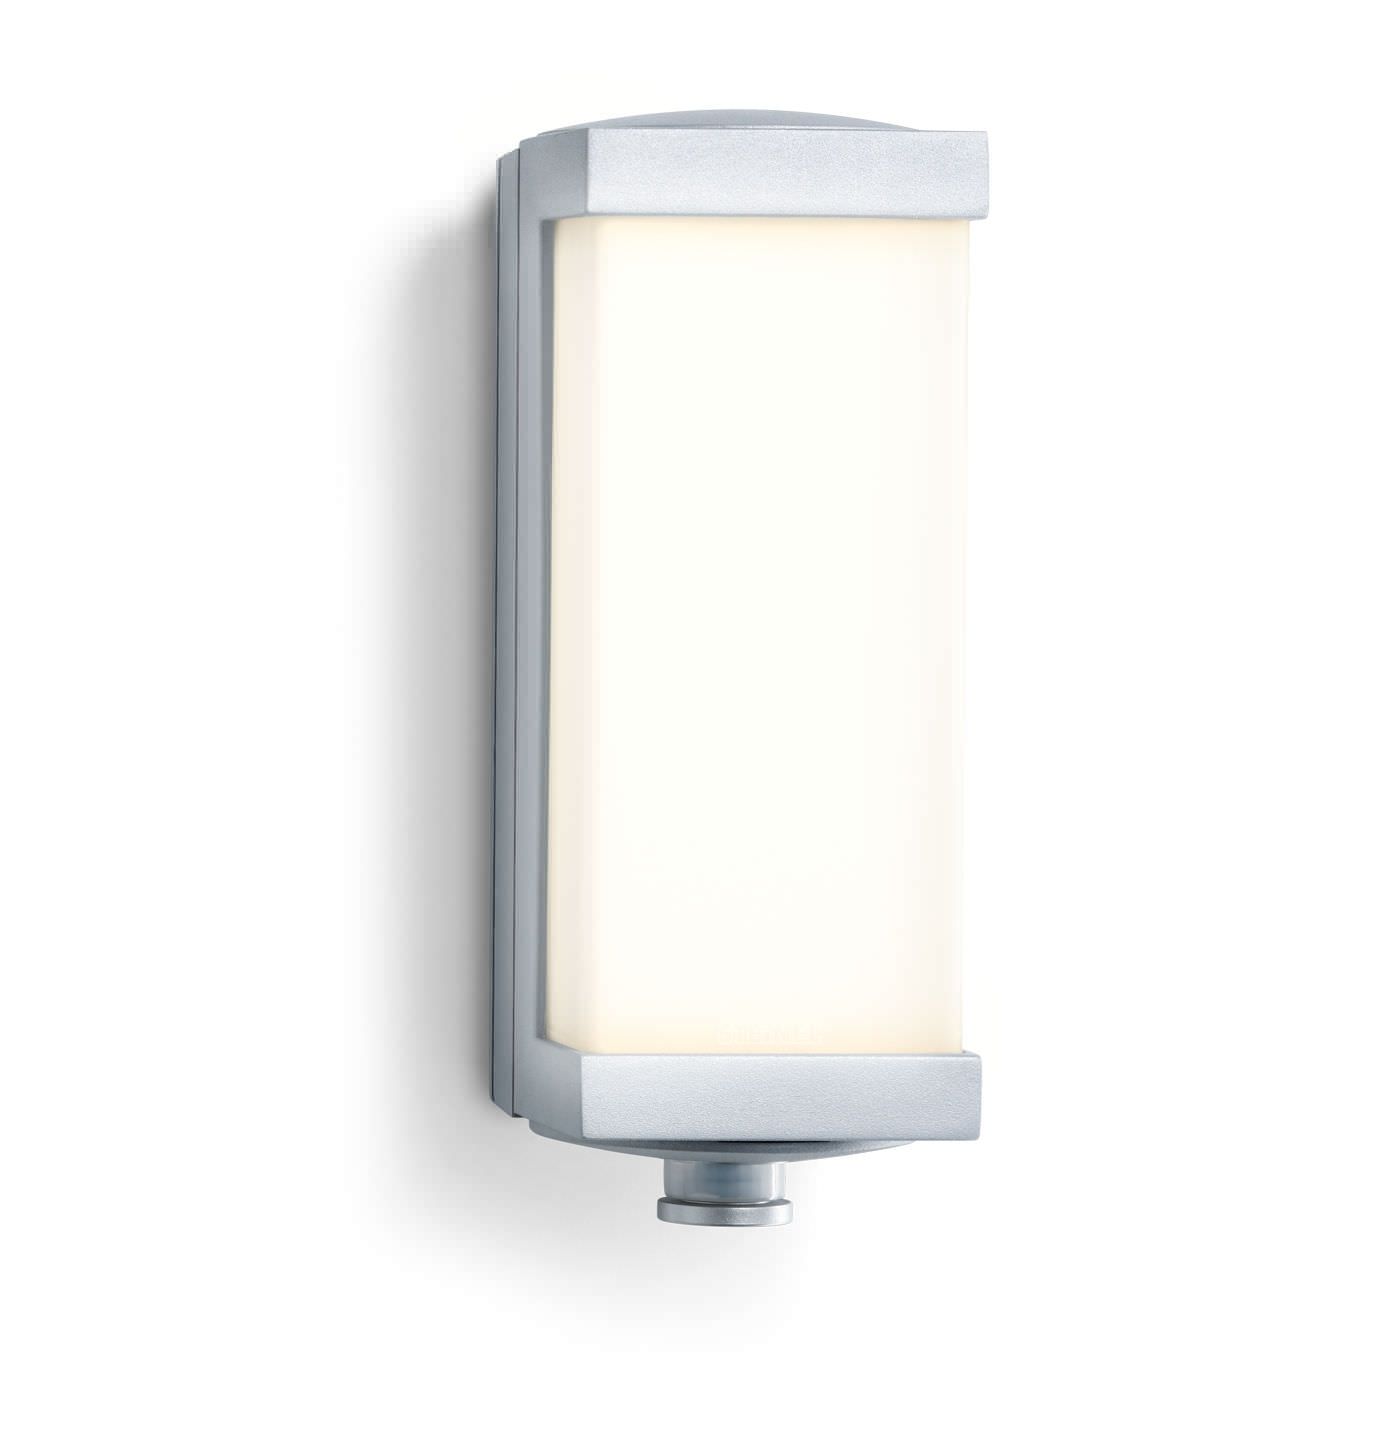 Contemporary Wall Light / Outdoor / Aluminum / Metal – L 666 Led Regarding Led Outdoor Wall Lights With Motion Sensor (View 9 of 15)